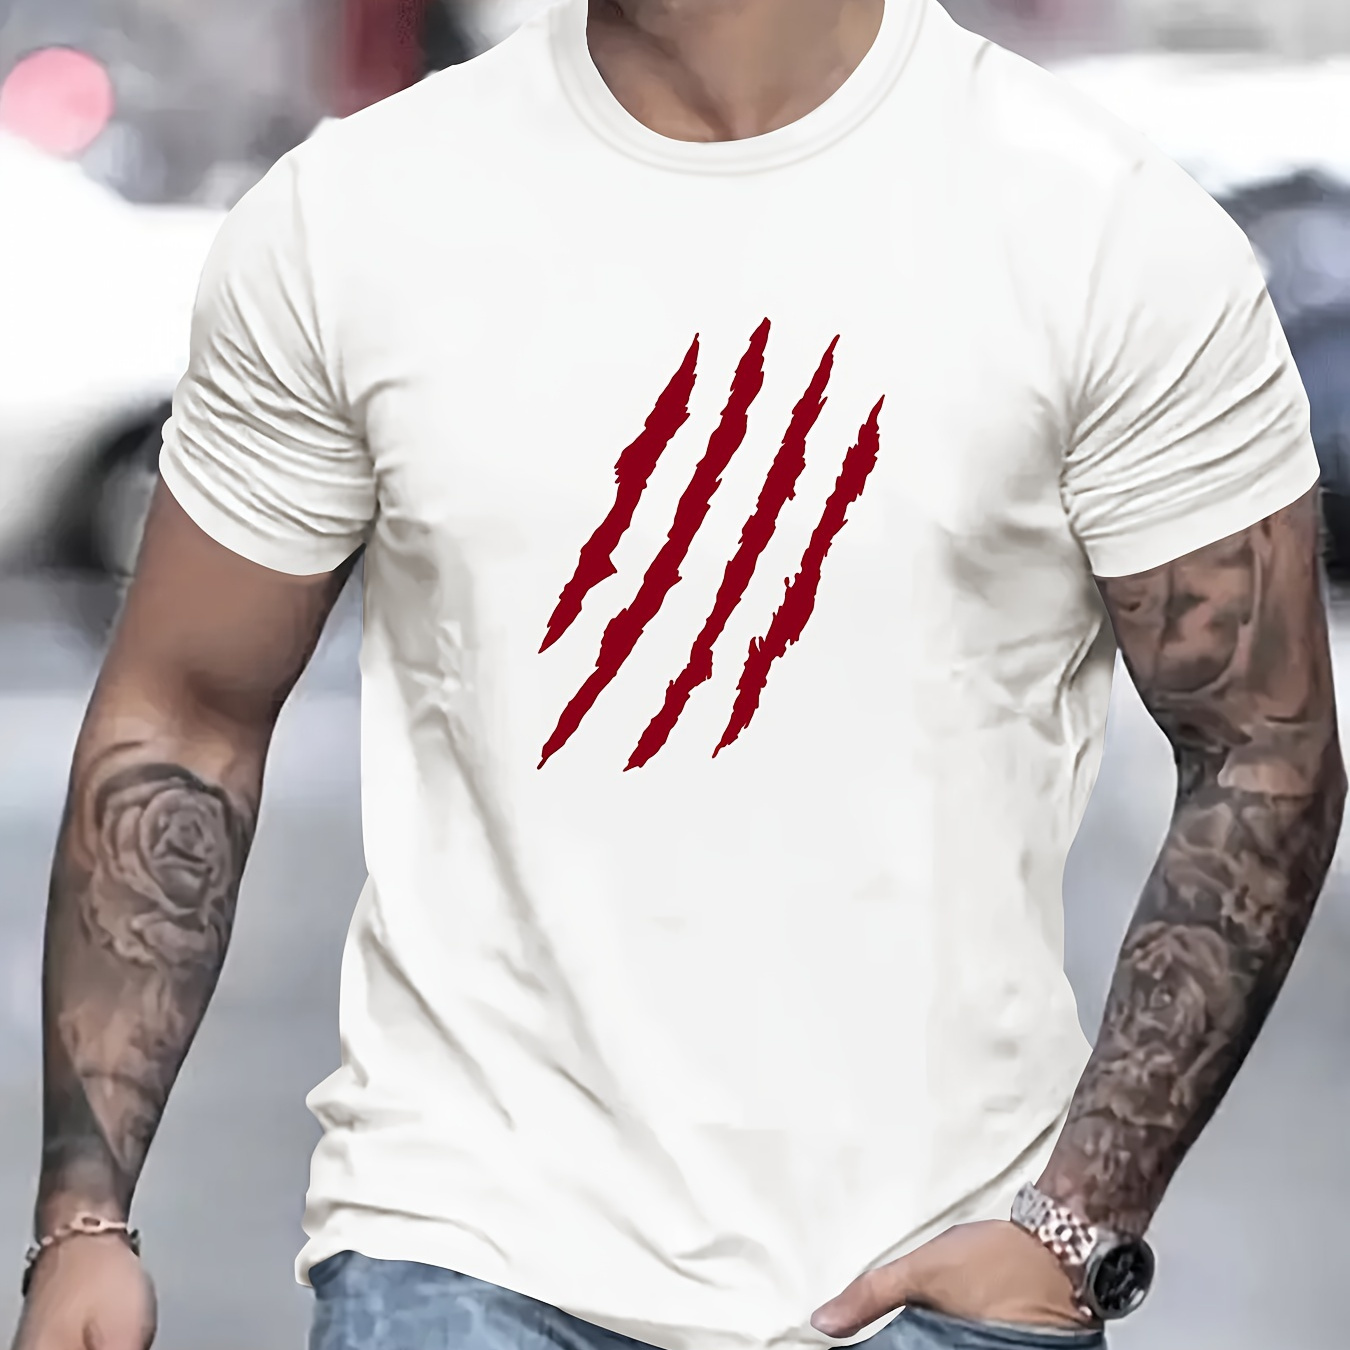 

Claw Print T Shirt, Tees For Men, Casual Short Sleeve T-shirt For Summer